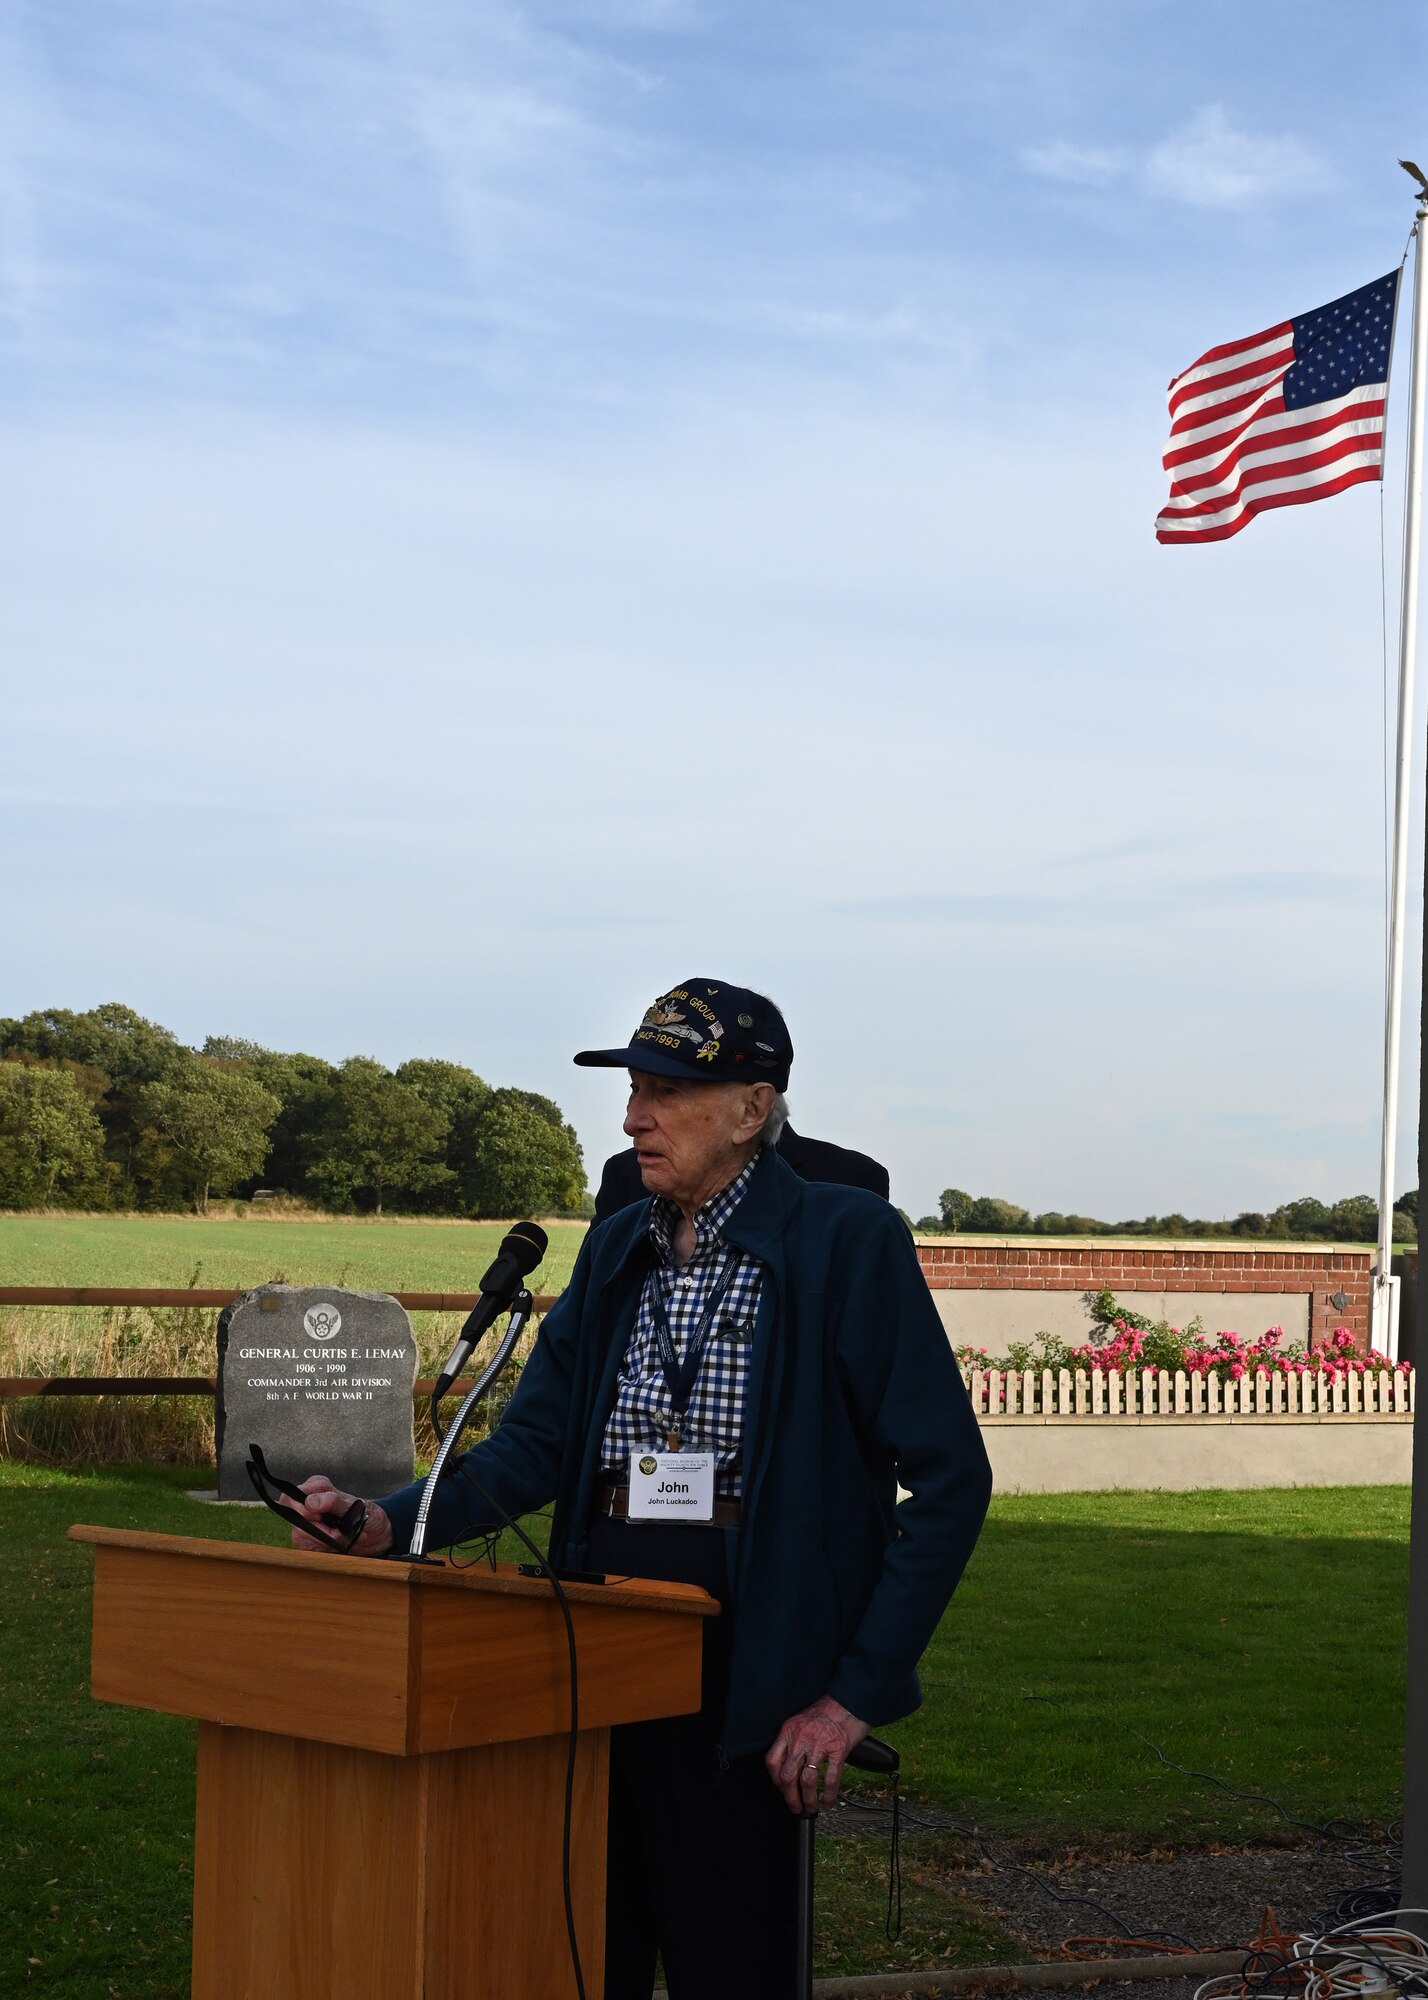 U.S. Army Air Force retired-Maj. John “Lucky” Luckadoo, legendary World War II B-17 pilot and 100th Bomb Group veteran, shares memories of his 25 combat missions during a ceremony honoring the 80th anniversary of “Black Week” at Thorpe Abbotts, Norfolk, England, Oct. 10, 2023. “Black Week” occurred from Oct. 8 to 14, 1943, earning the name due to the heavy losses endured by Eighth Air Force. The Mighty Eighth lost 138 heavy bombers, 24 fighters and more than 1,400 Airmen to enemy action. The 100th BG itself suffered the tragic loss of 12 aircraft and 121 crew members over Germany. (U.S. Air Force photo by Karen Abeyasekere)